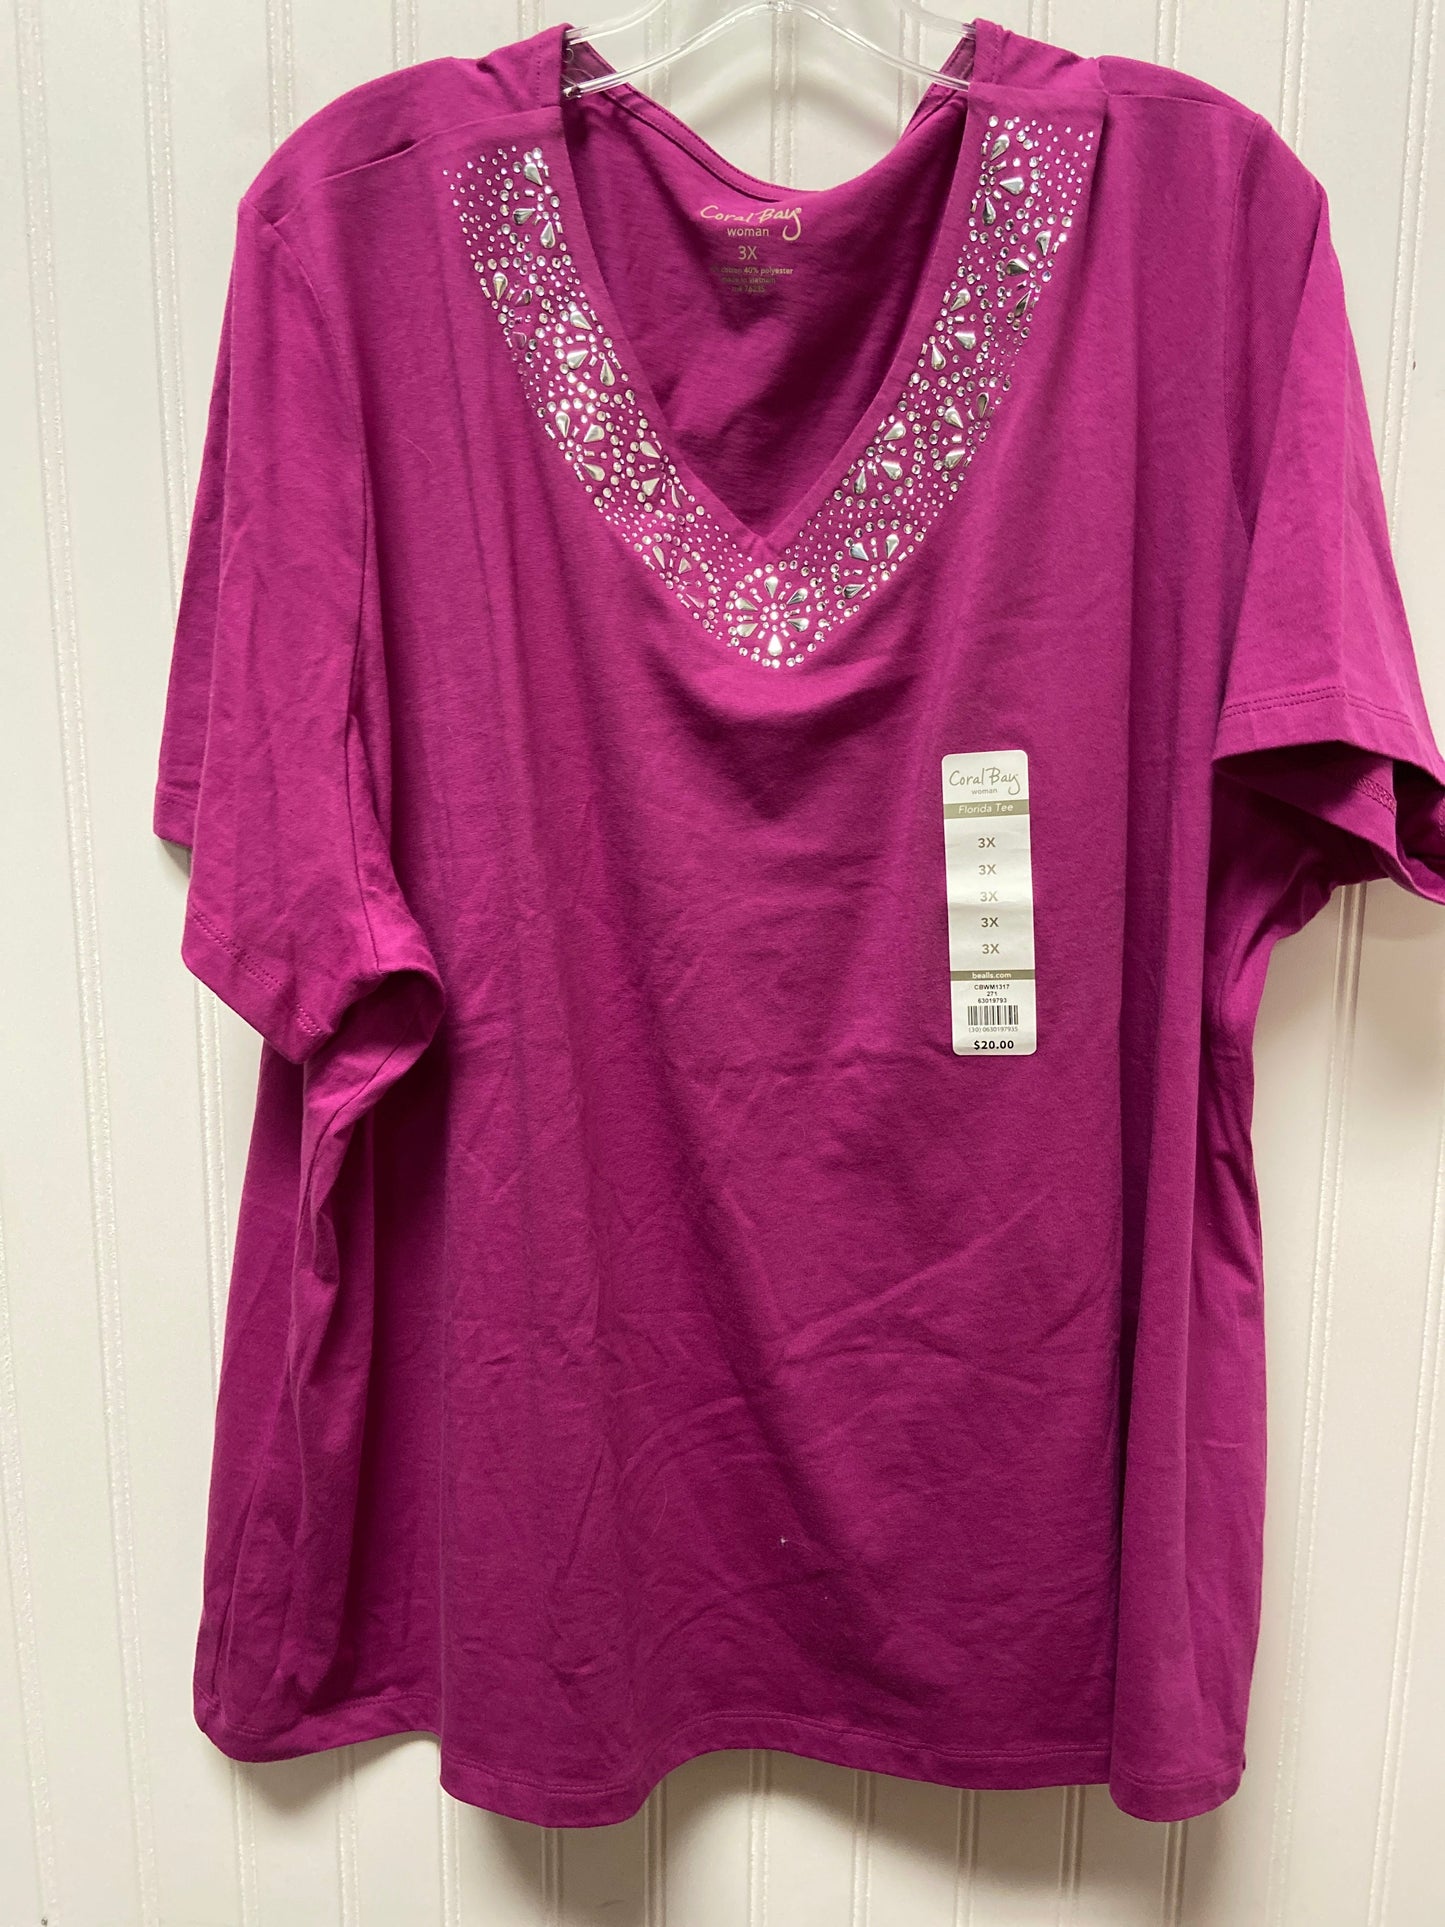 Purple Top Short Sleeve Coral Bay, Size 3x